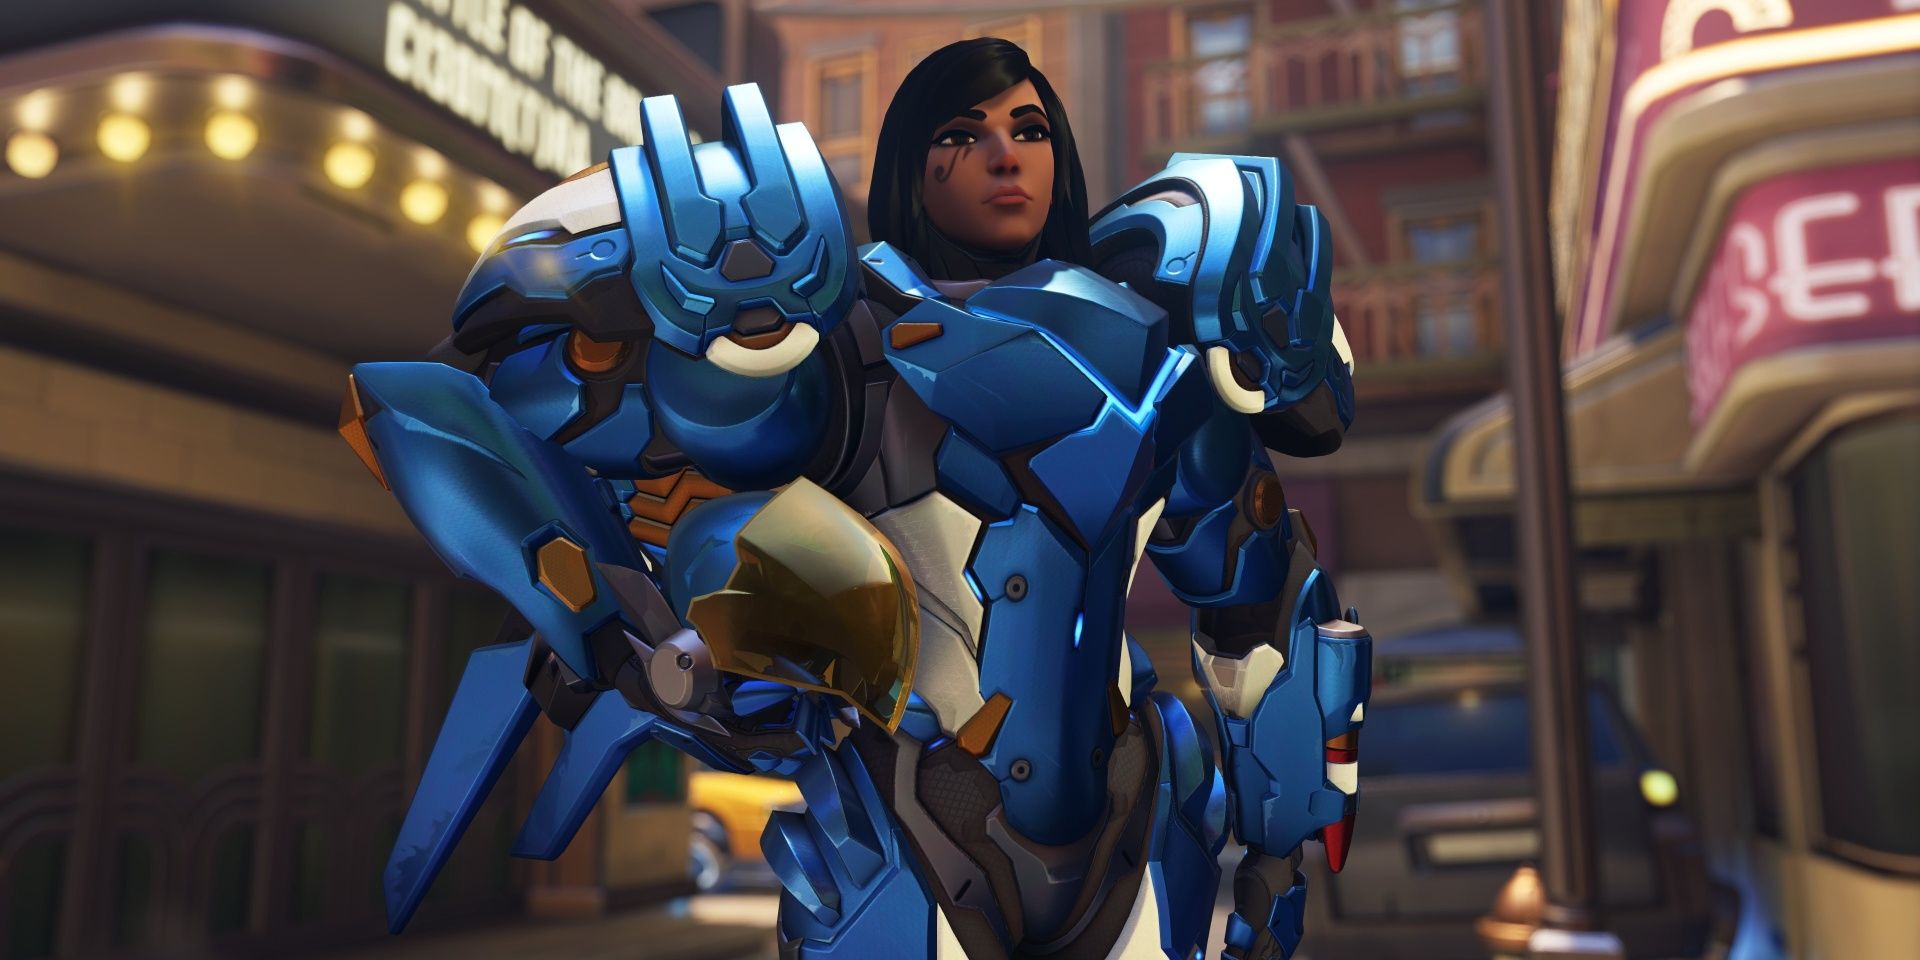 Pharah from Overwatch 2